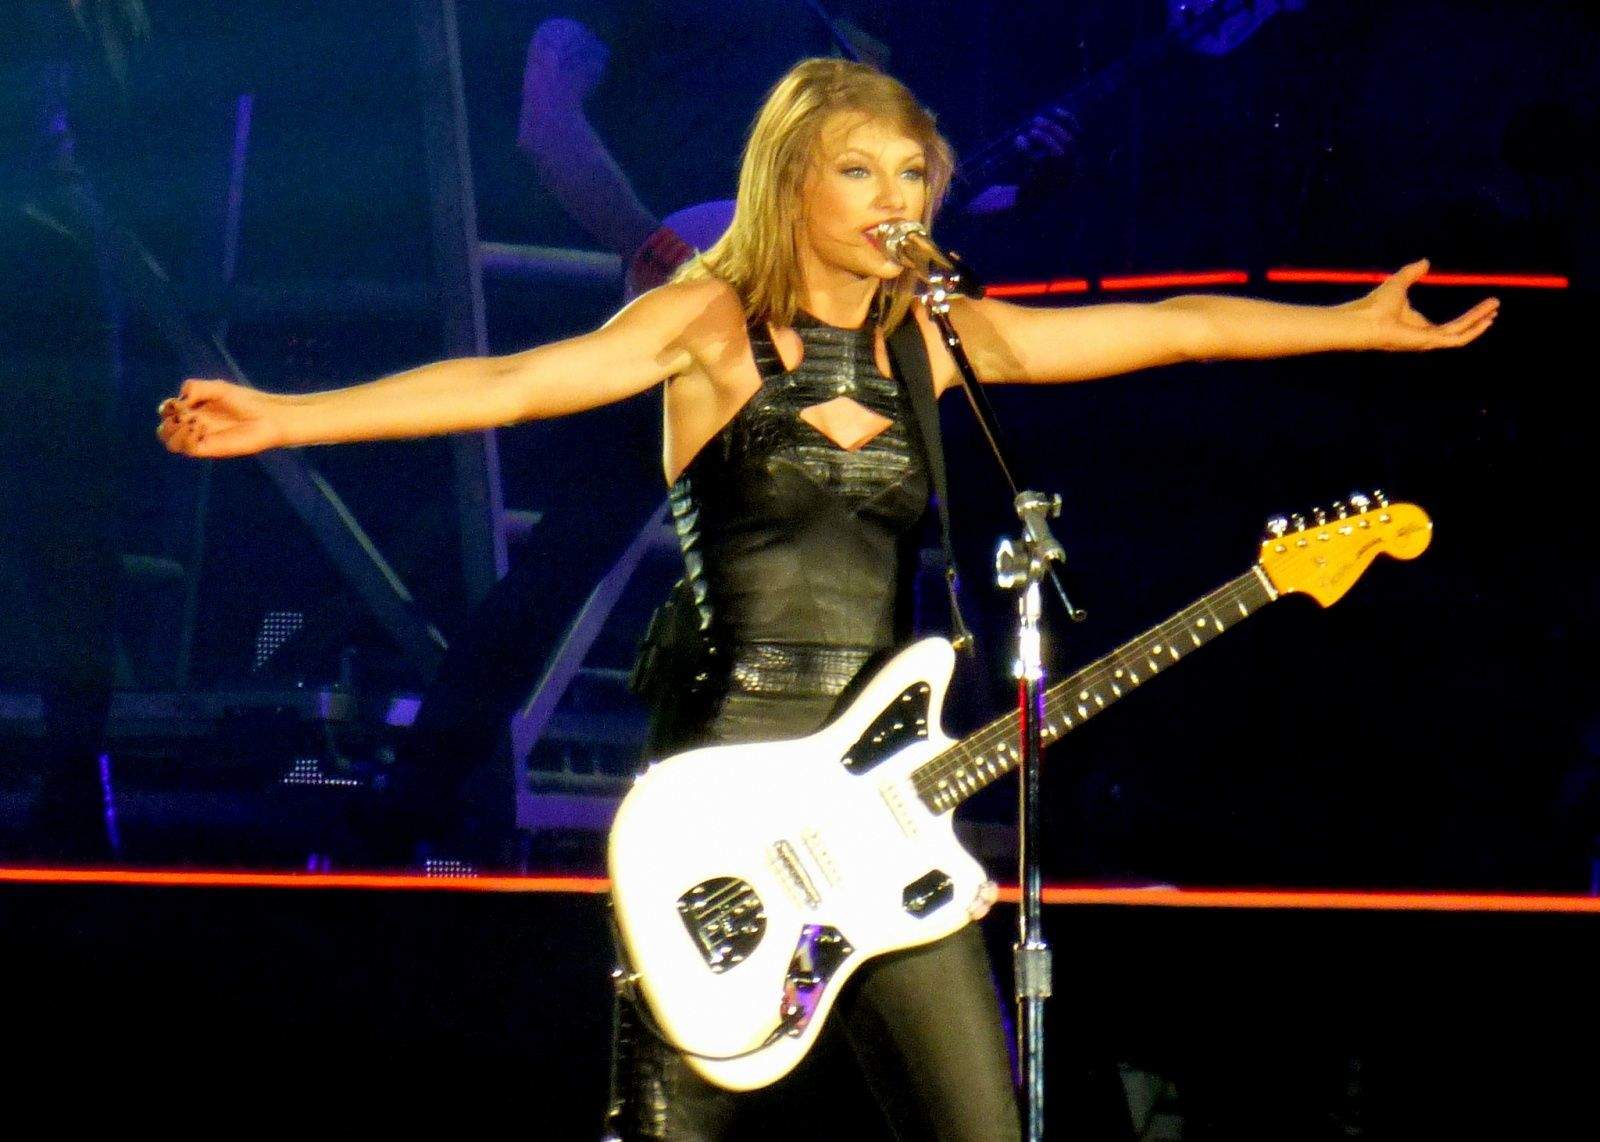 Photographers assigned to Taylor Swift concerts will be greeted by a friendlier photo contract.